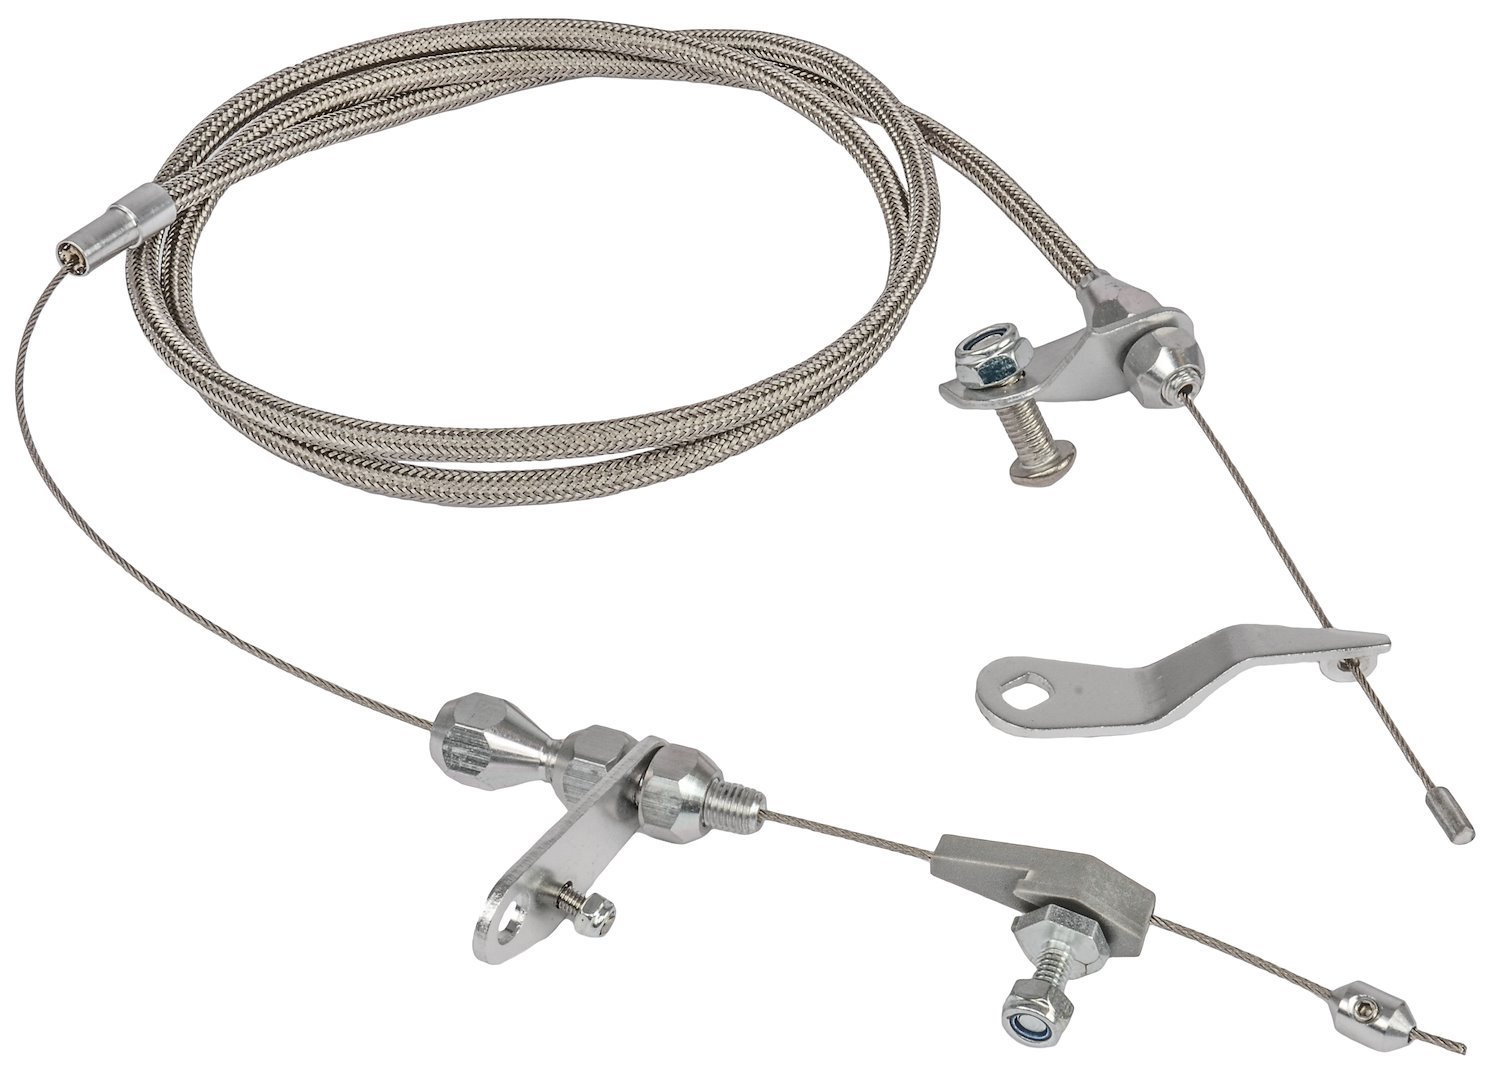 Transmission Kickdown Cable Kit [Ford C6, Stainless Steel]